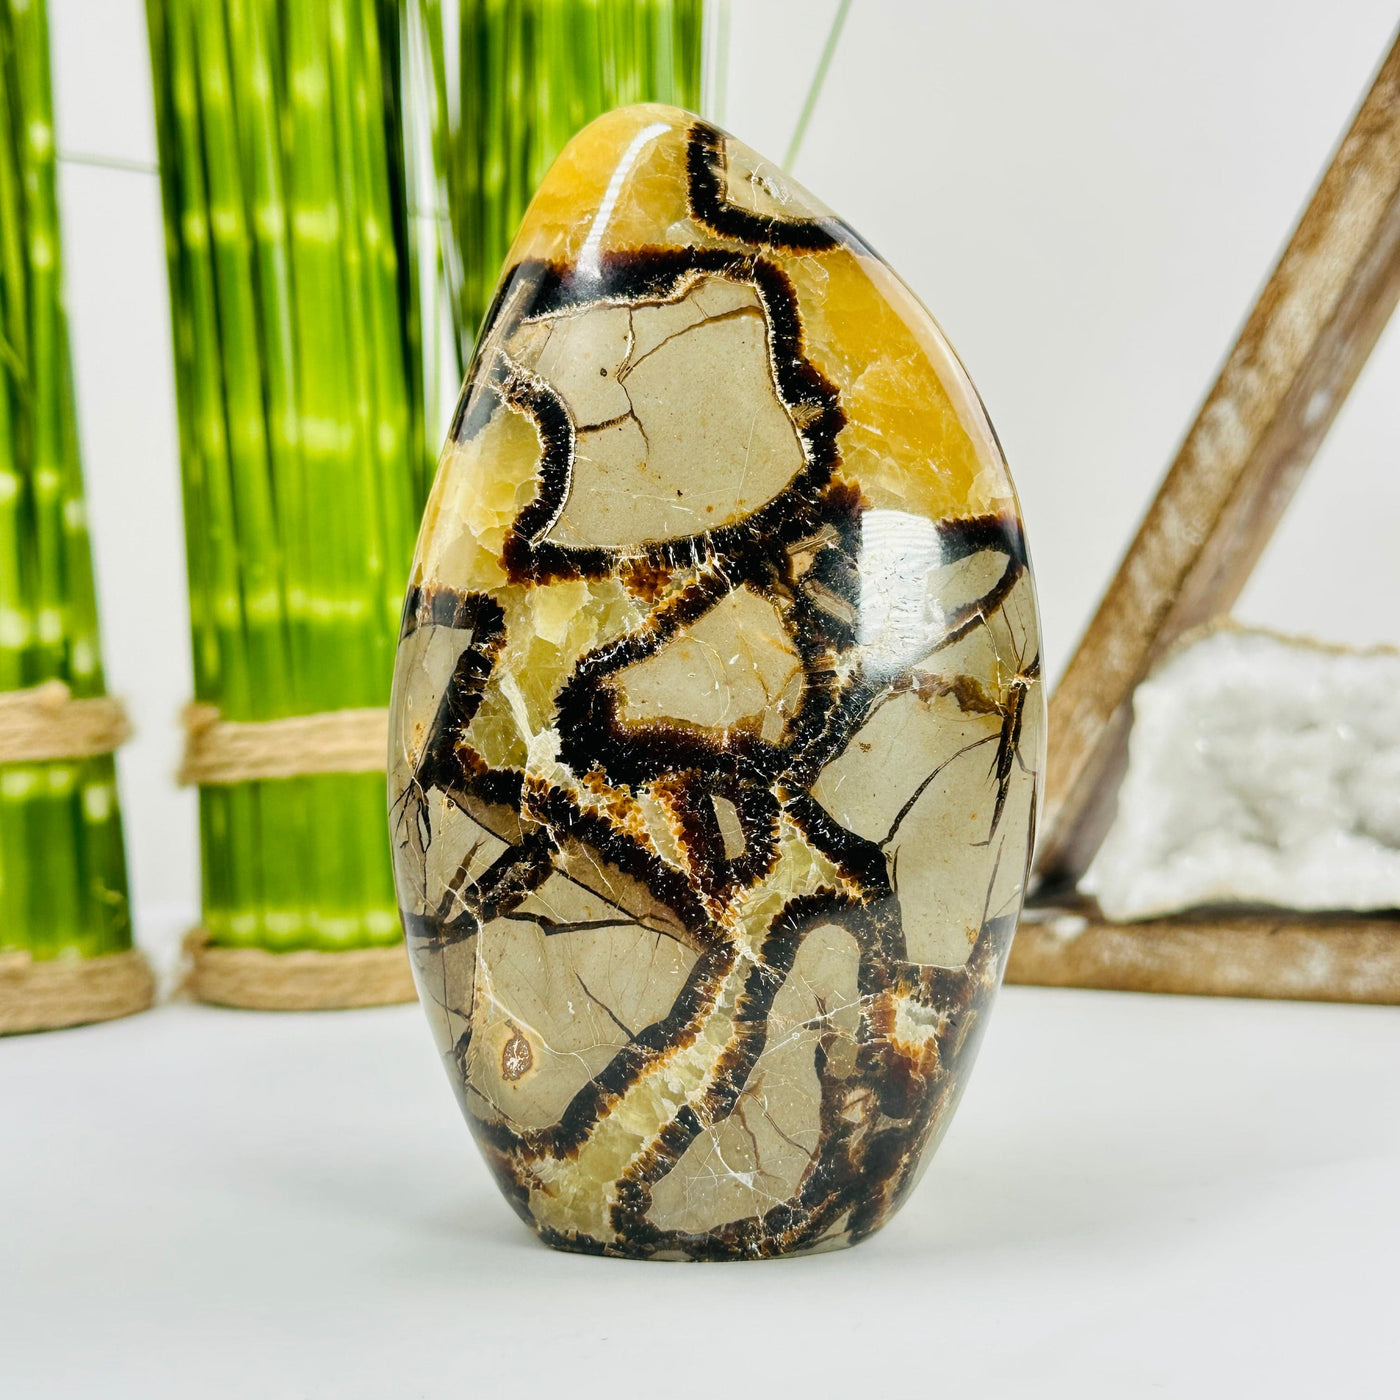 septarian polished decoration with decor in the background